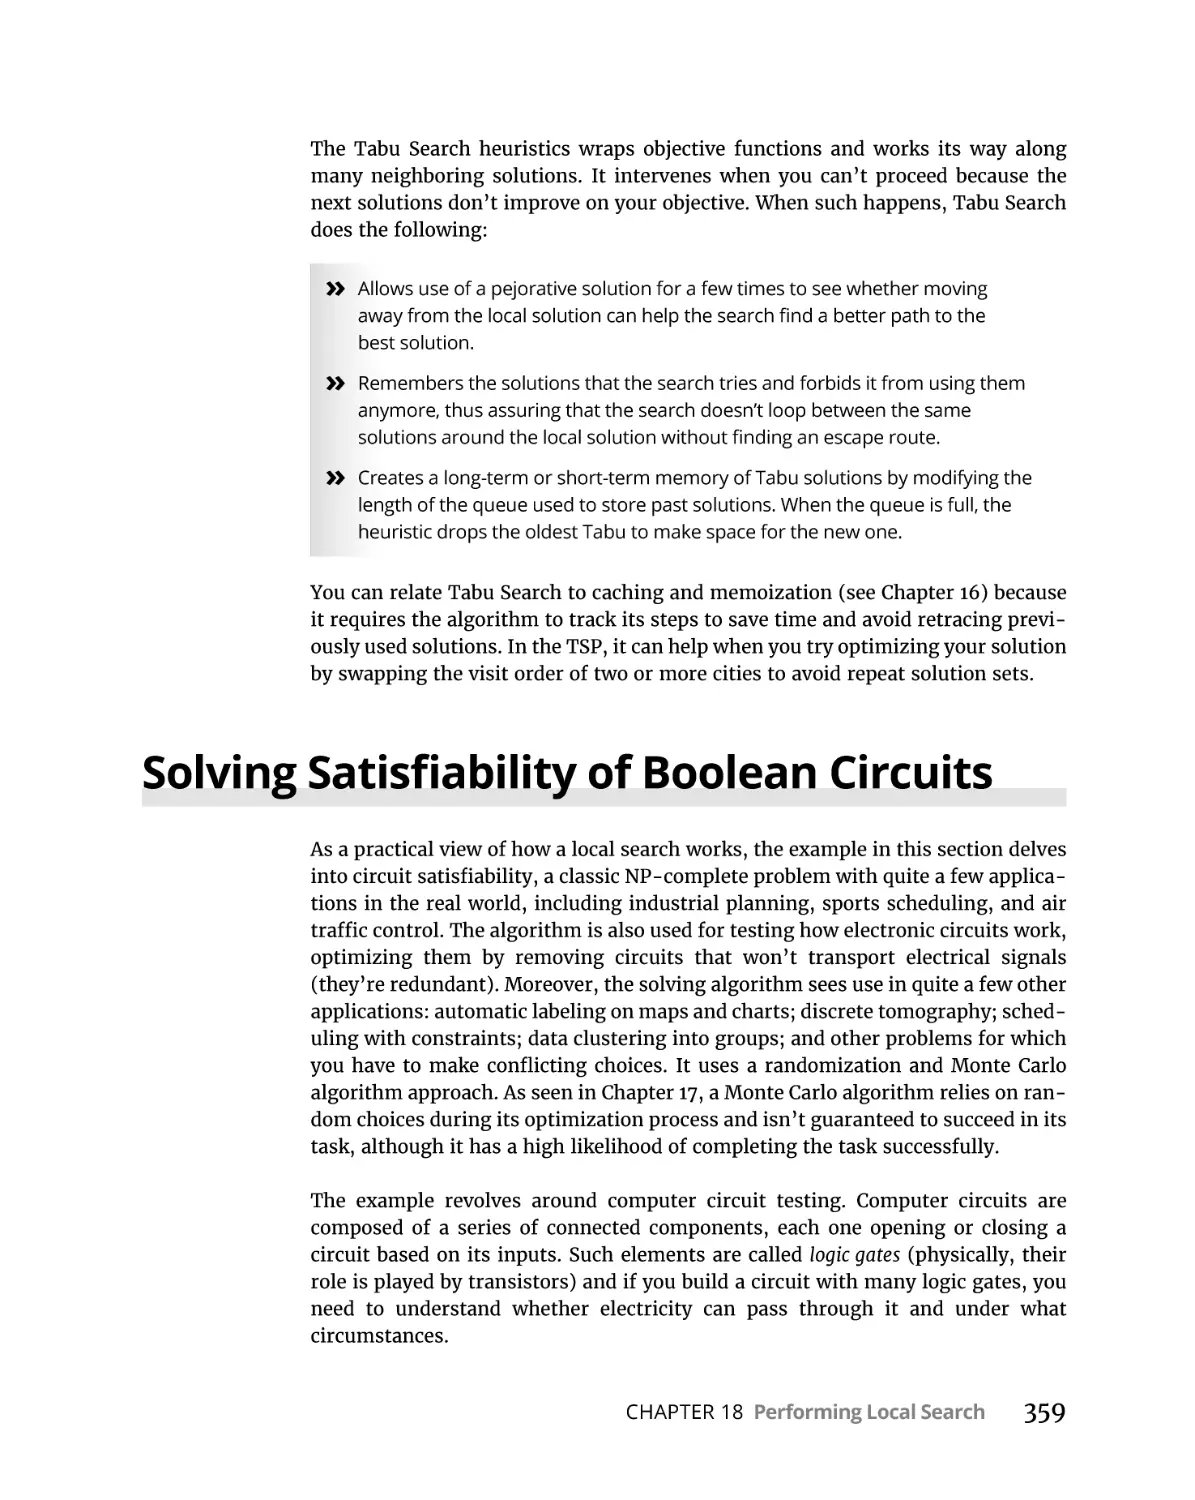 Solving Satisfiability of Boolean Circuits